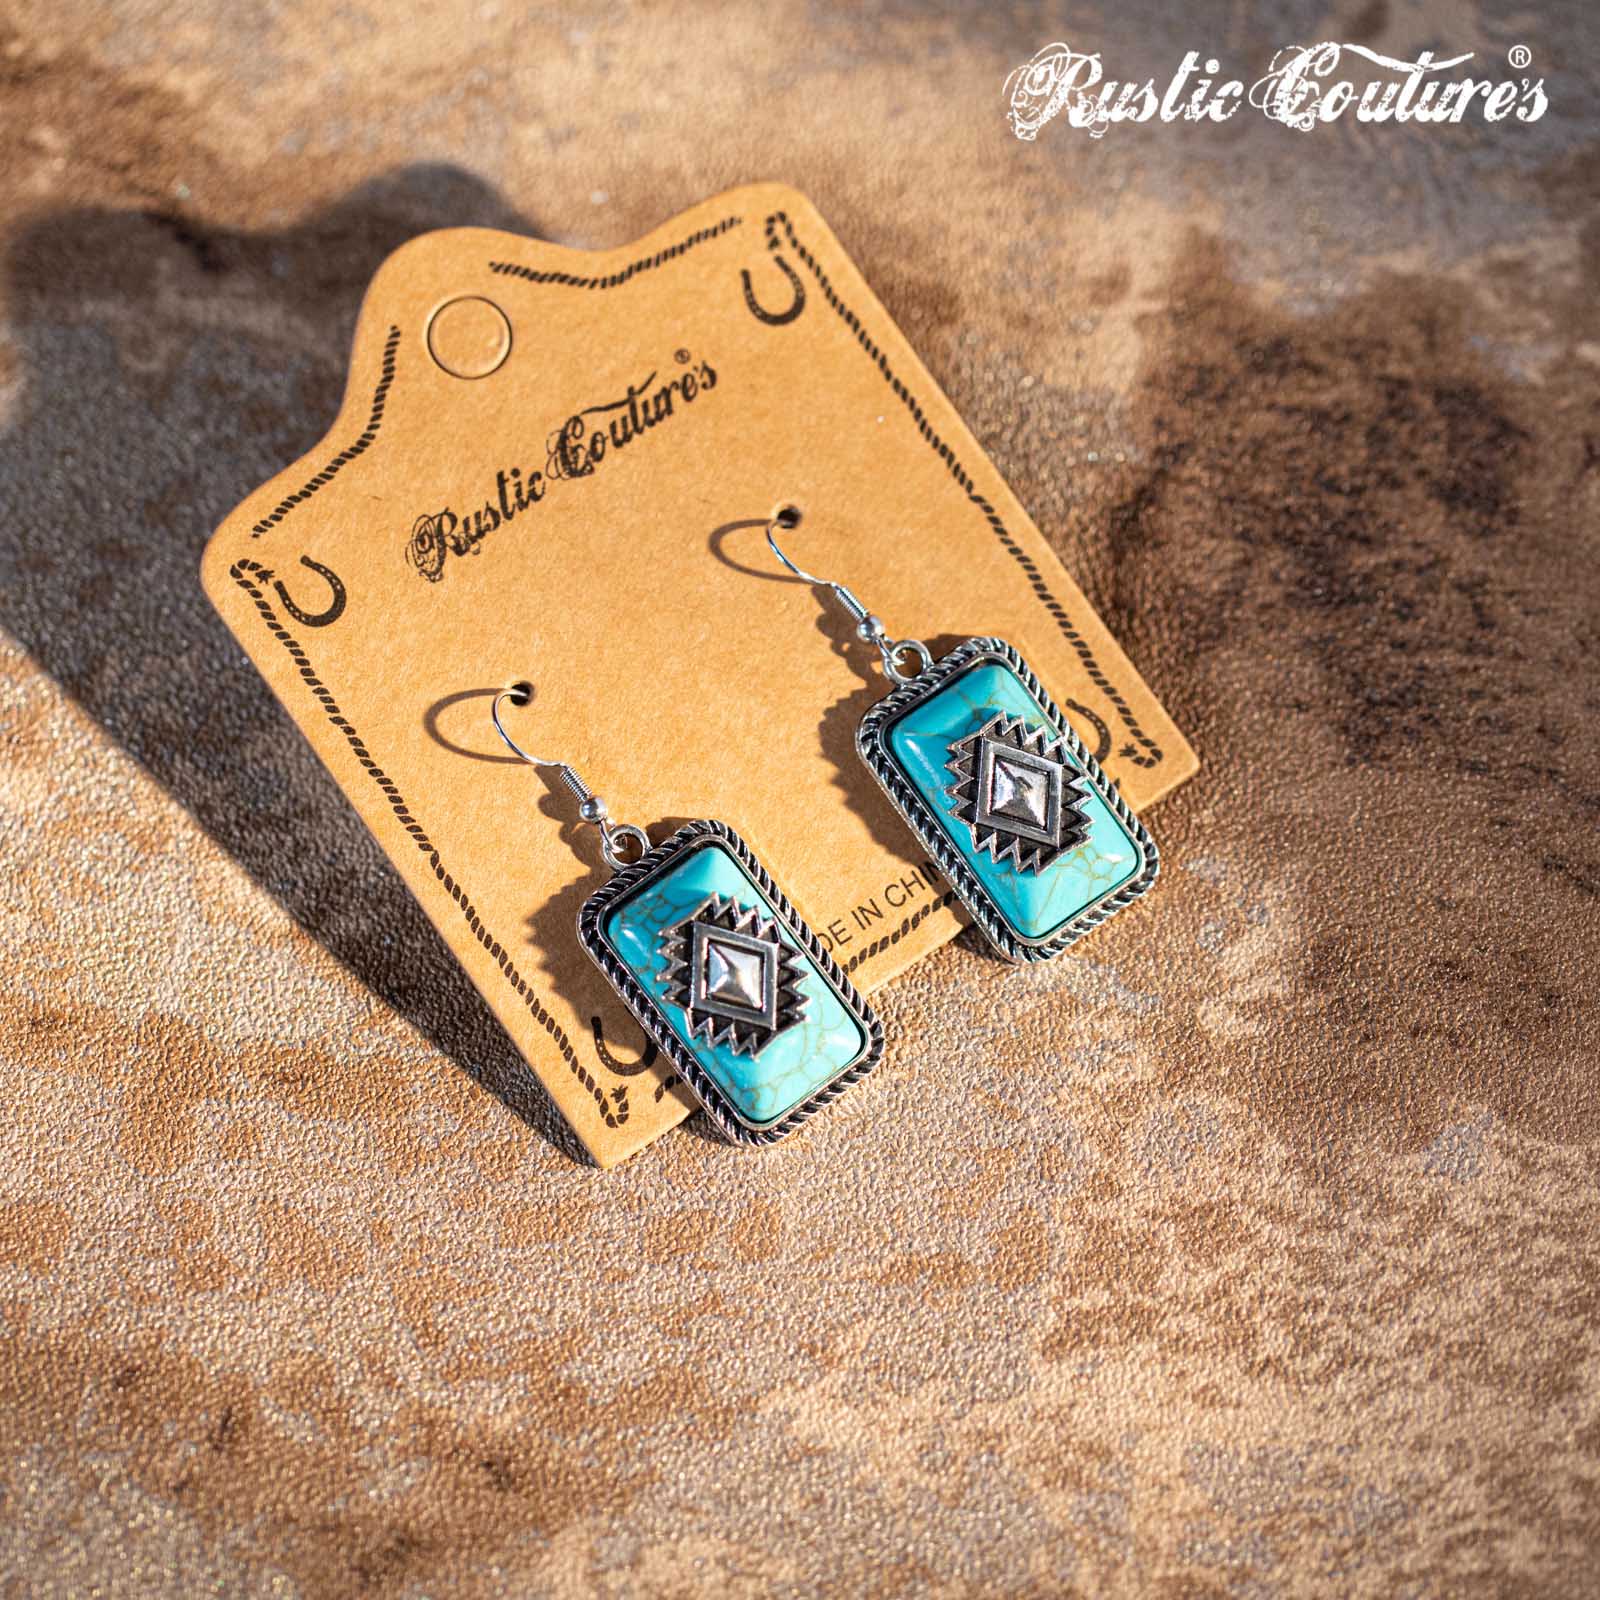 Rustic Couture's Bohemian Rectangular Block Synthetic Turquoise Earring